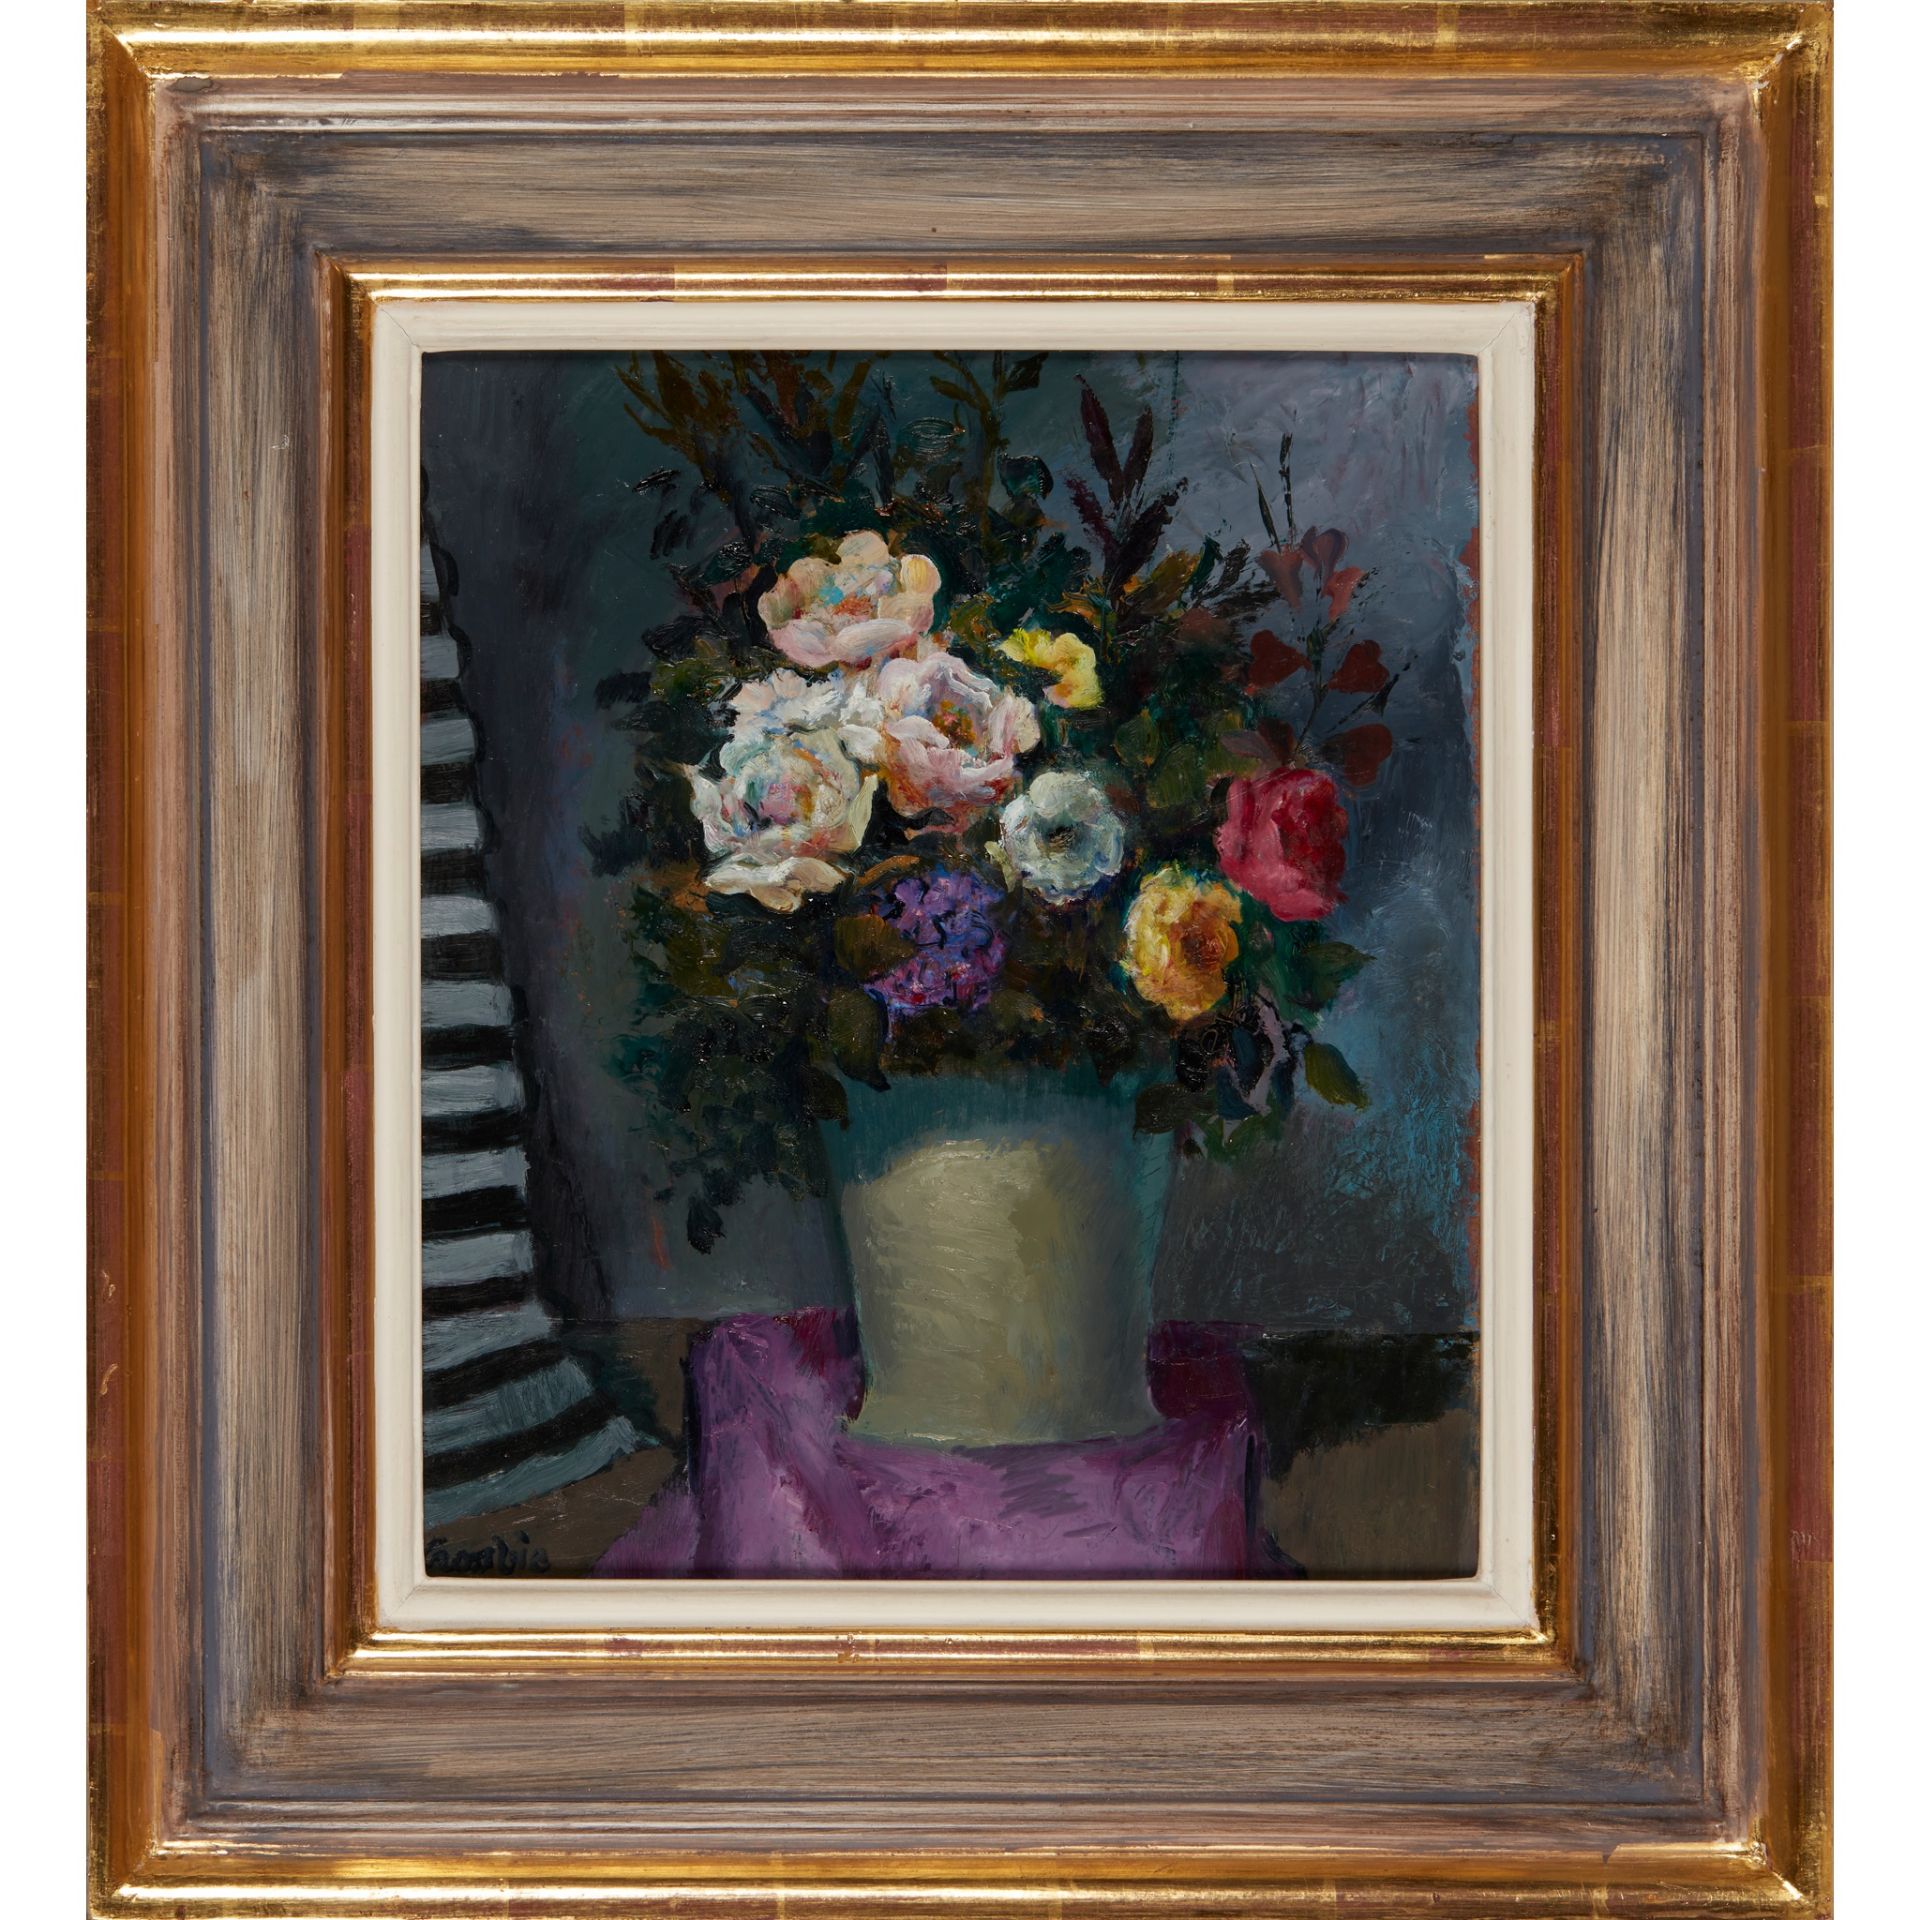 § WILLIAM CROSBIE R.S.A. (SCOTTISH 1915-1999) STILL LIFE WITH ROSES IN A GREY VASE ON PURPLE CLOTH, - Image 2 of 3